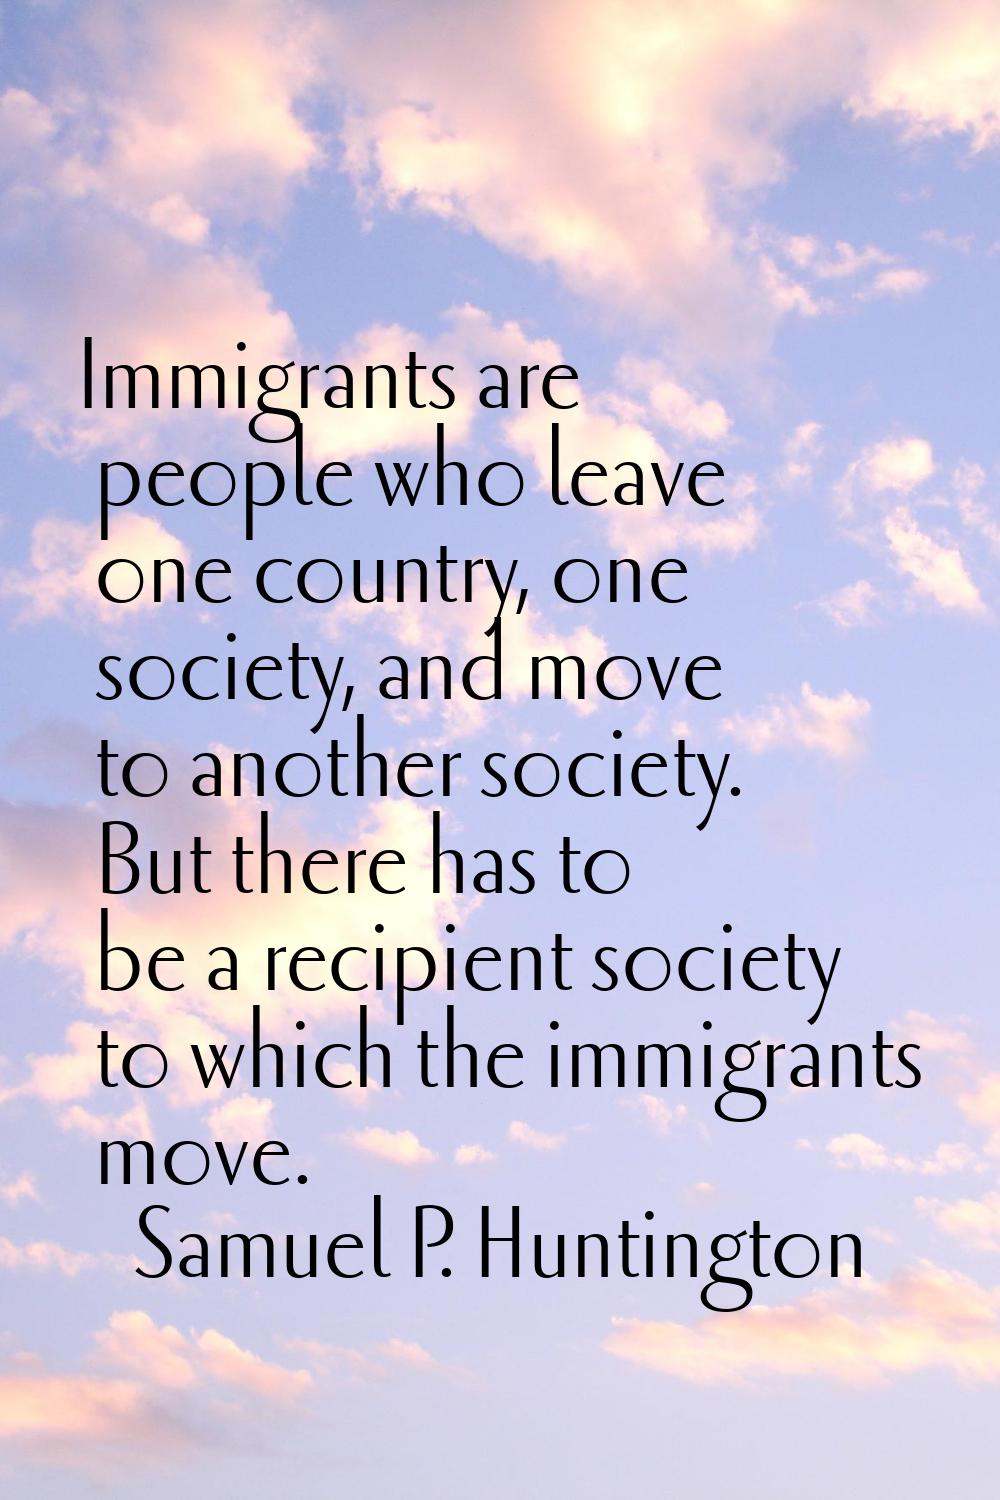 Immigrants are people who leave one country, one society, and move to another society. But there ha